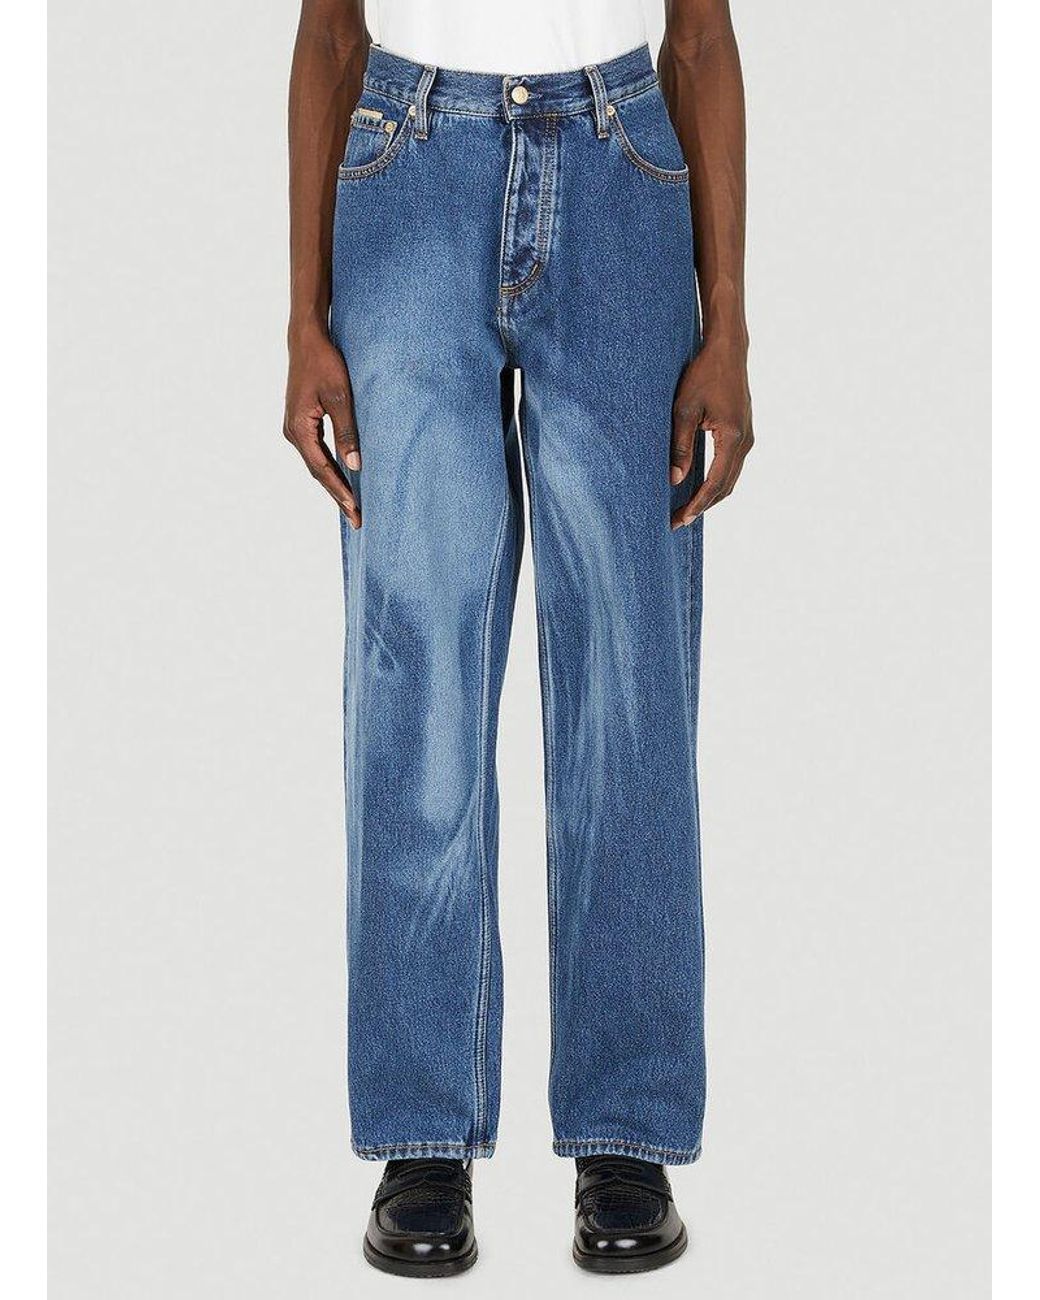 Eytys Benz Laser Stonewashed Jeans in Blue | Lyst